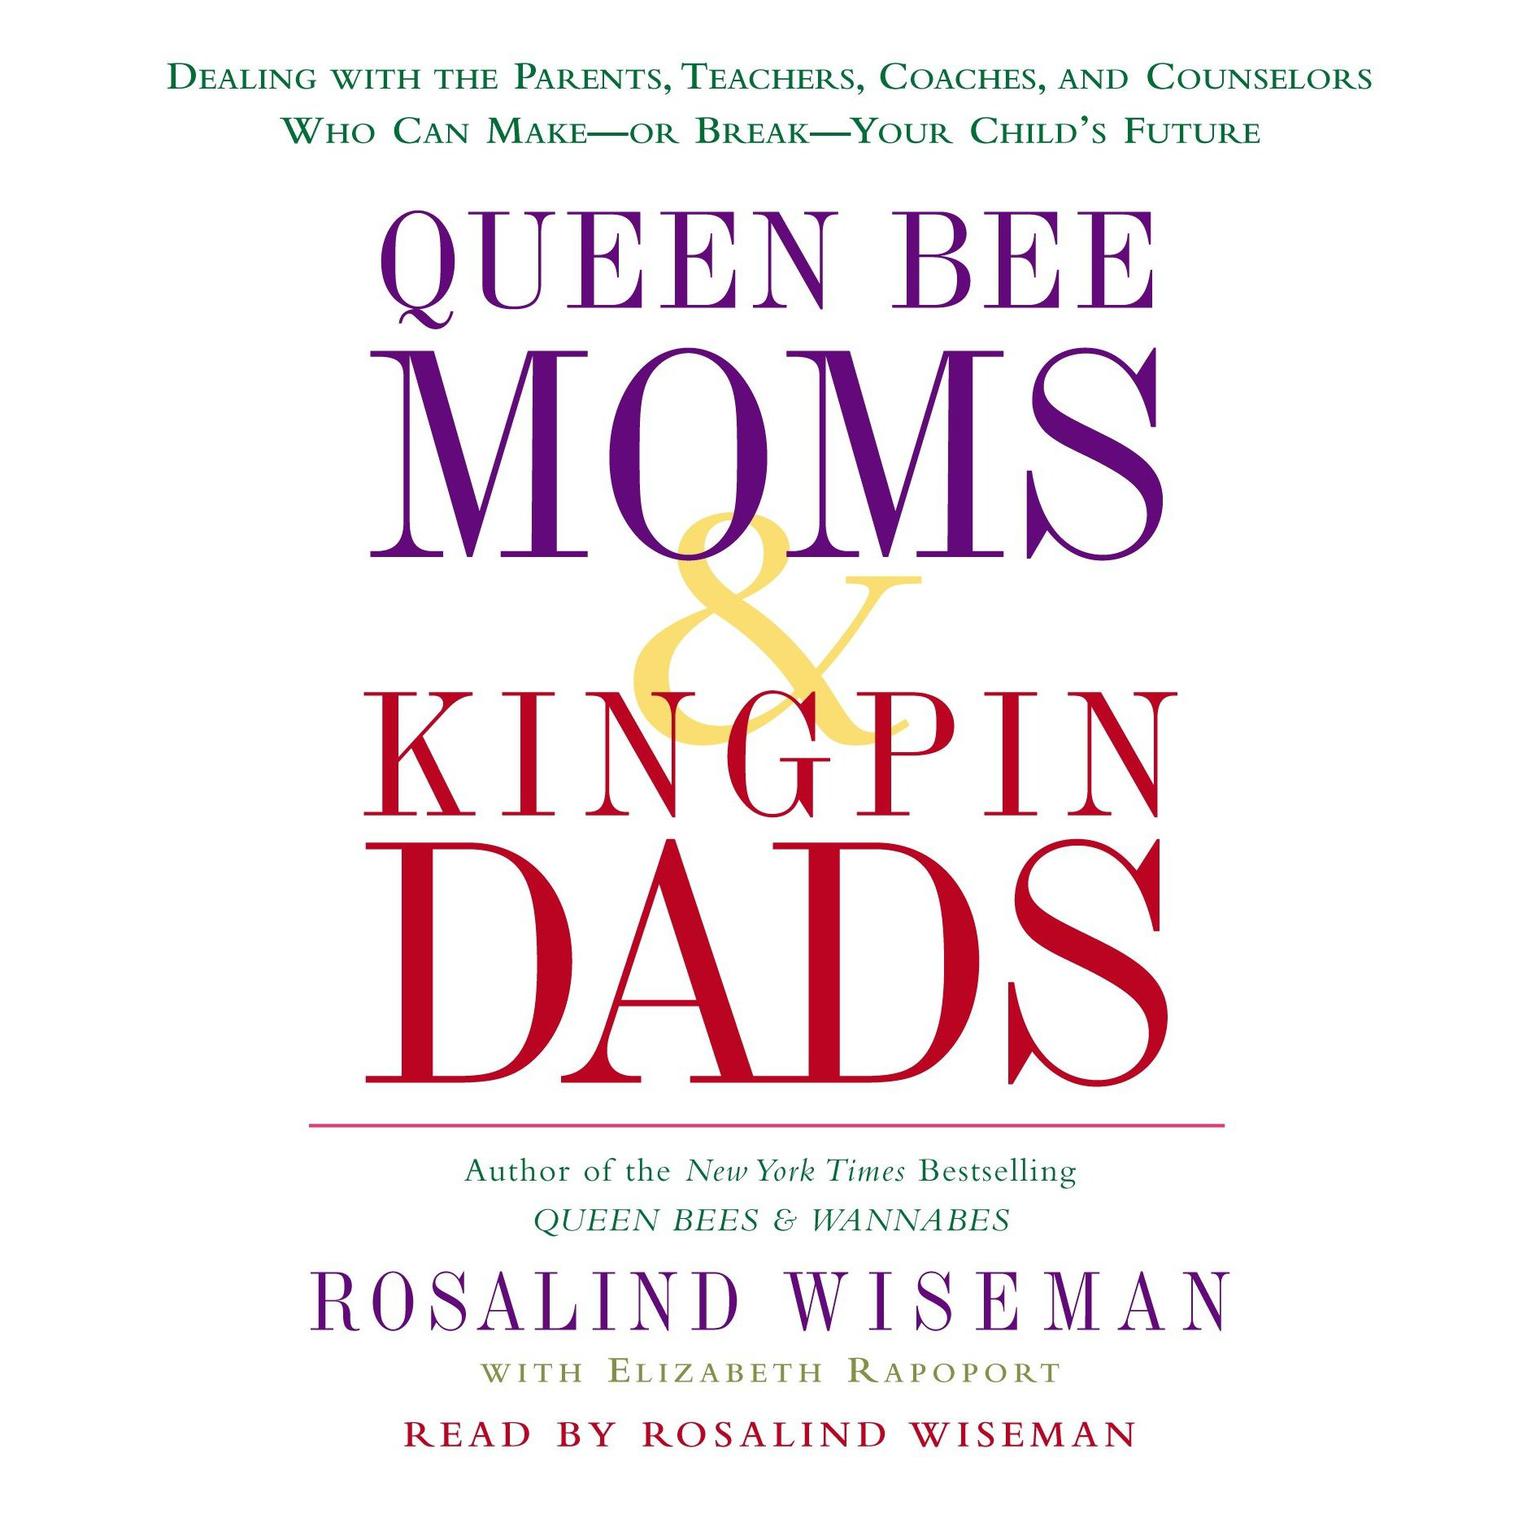 Queen Bee Moms & Kingpin Dads (Abridged): Dealing with the Parents, Teachers, Coaches, and Counselors Who Can Make--or Break--Your Childs Future Audiobook, by Rosalind Wiseman